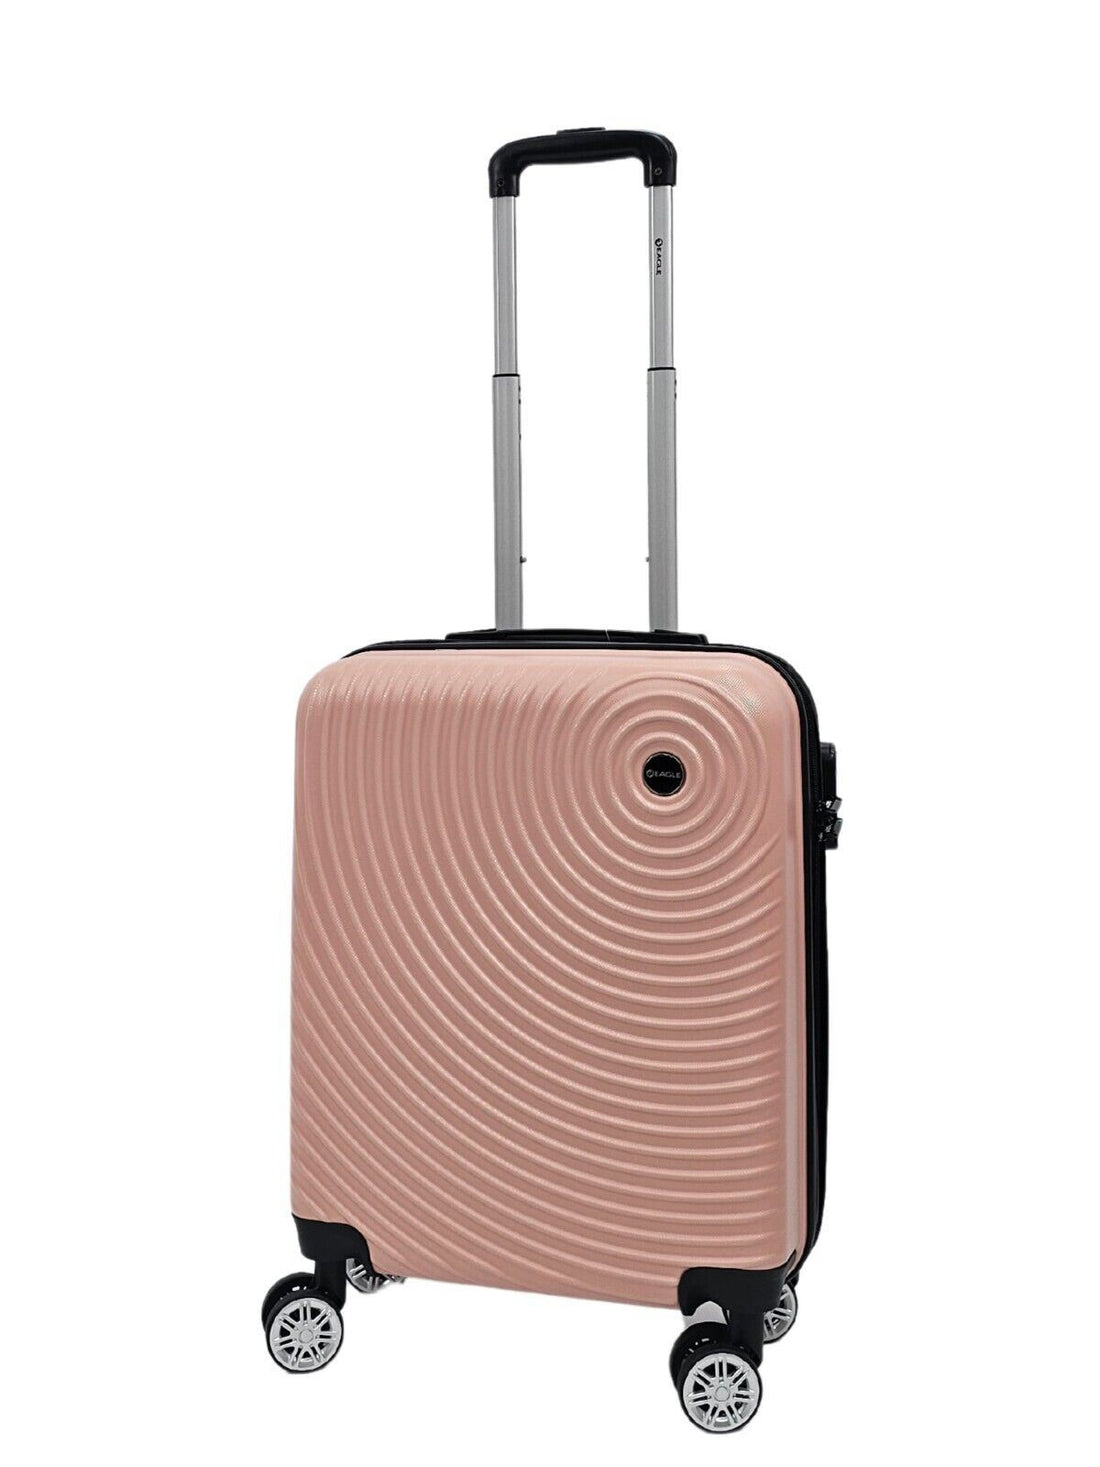 Brookside Cabin Hard Shell Suitcase in Rose Gold